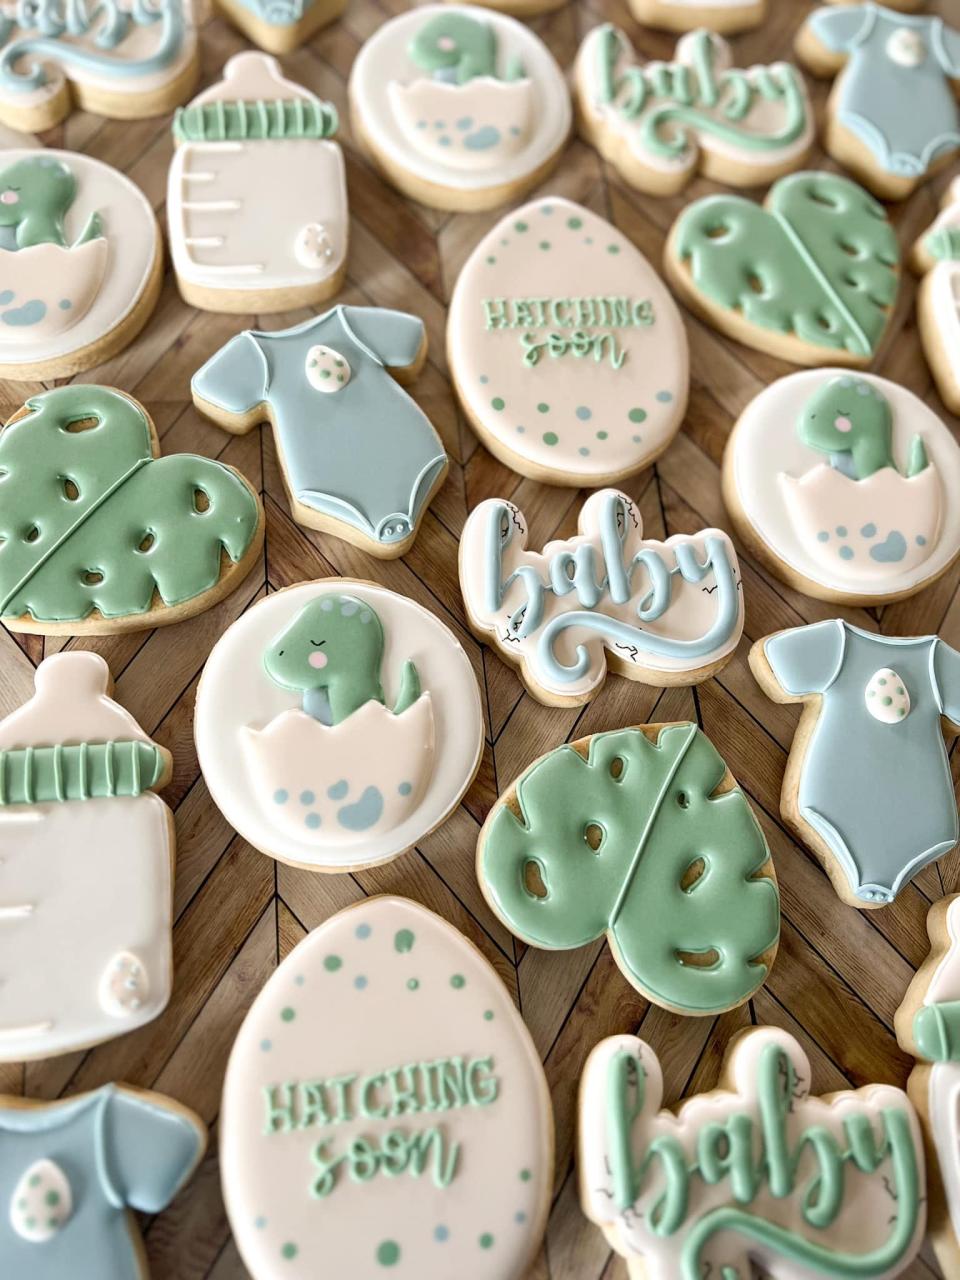 In December 2023, Bethany Bruni started her home-based business specializing in custom decorated sugar cookies.